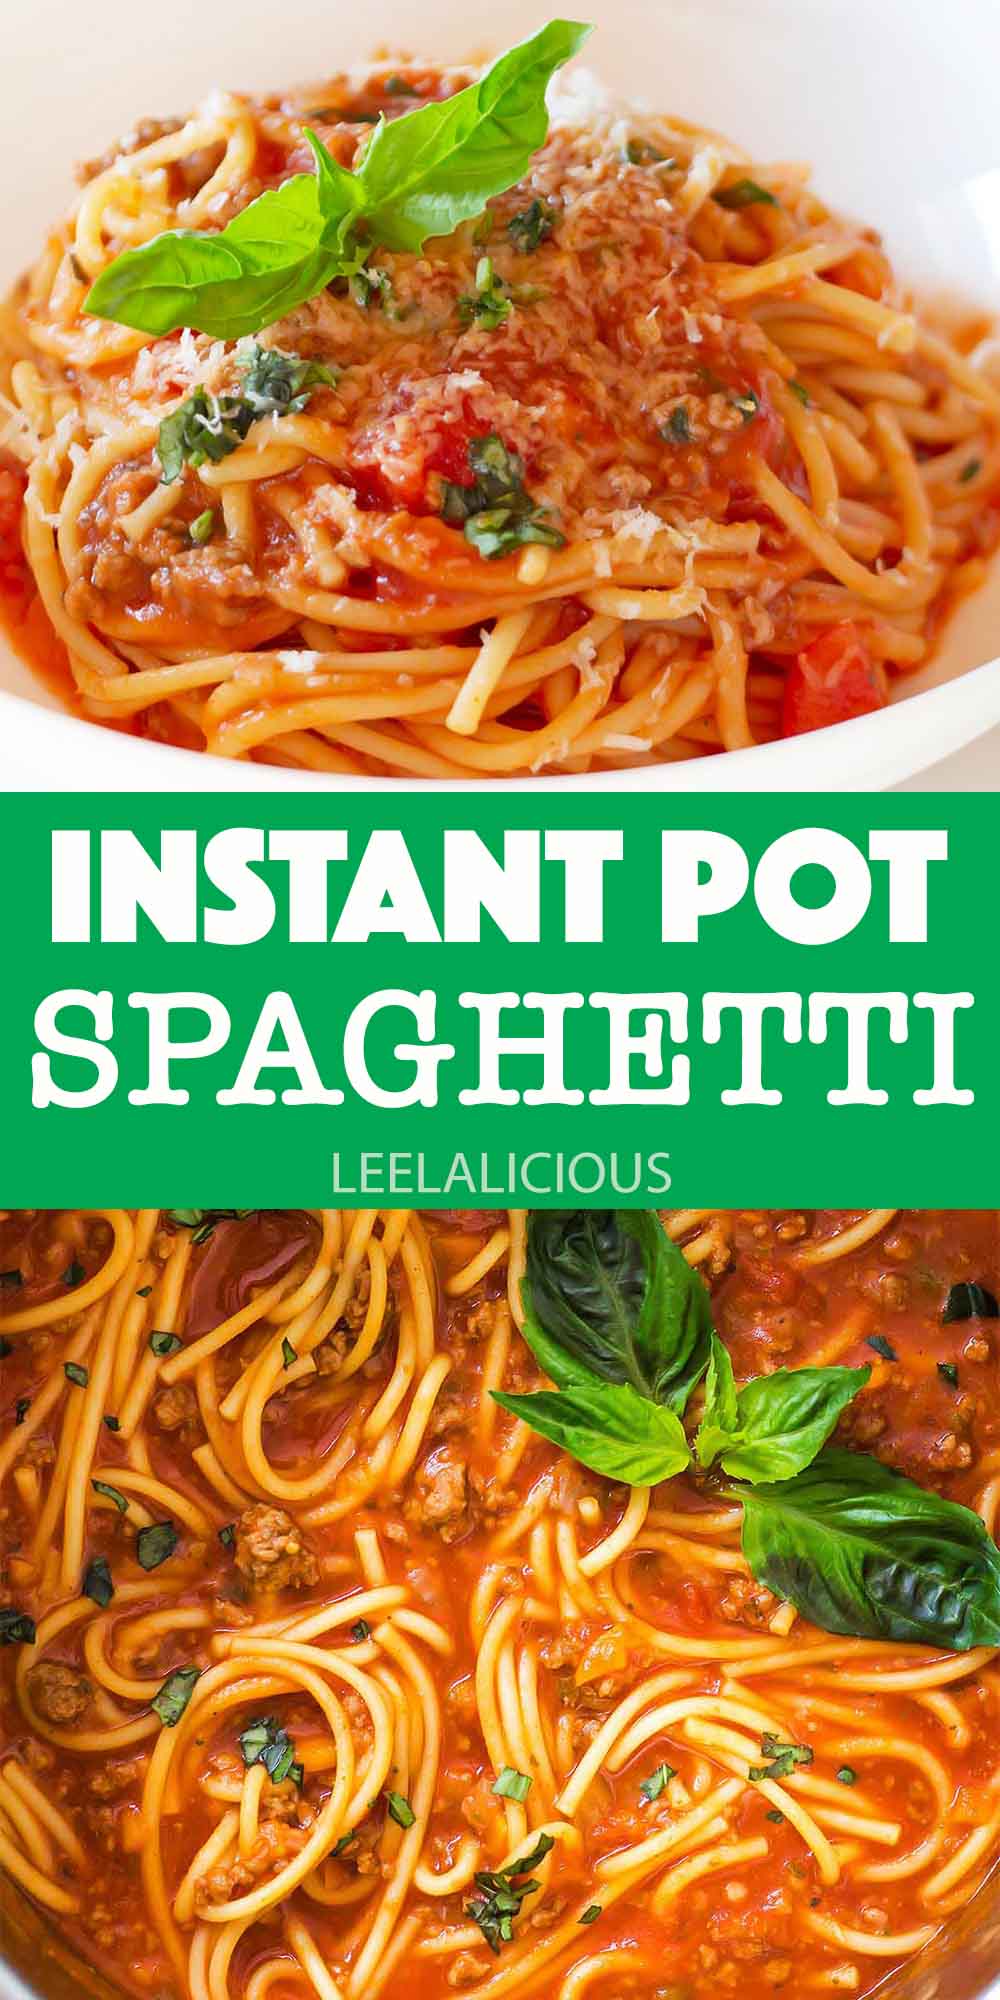 spaghetti with meat sauce in white bowl and inside Instant Pot